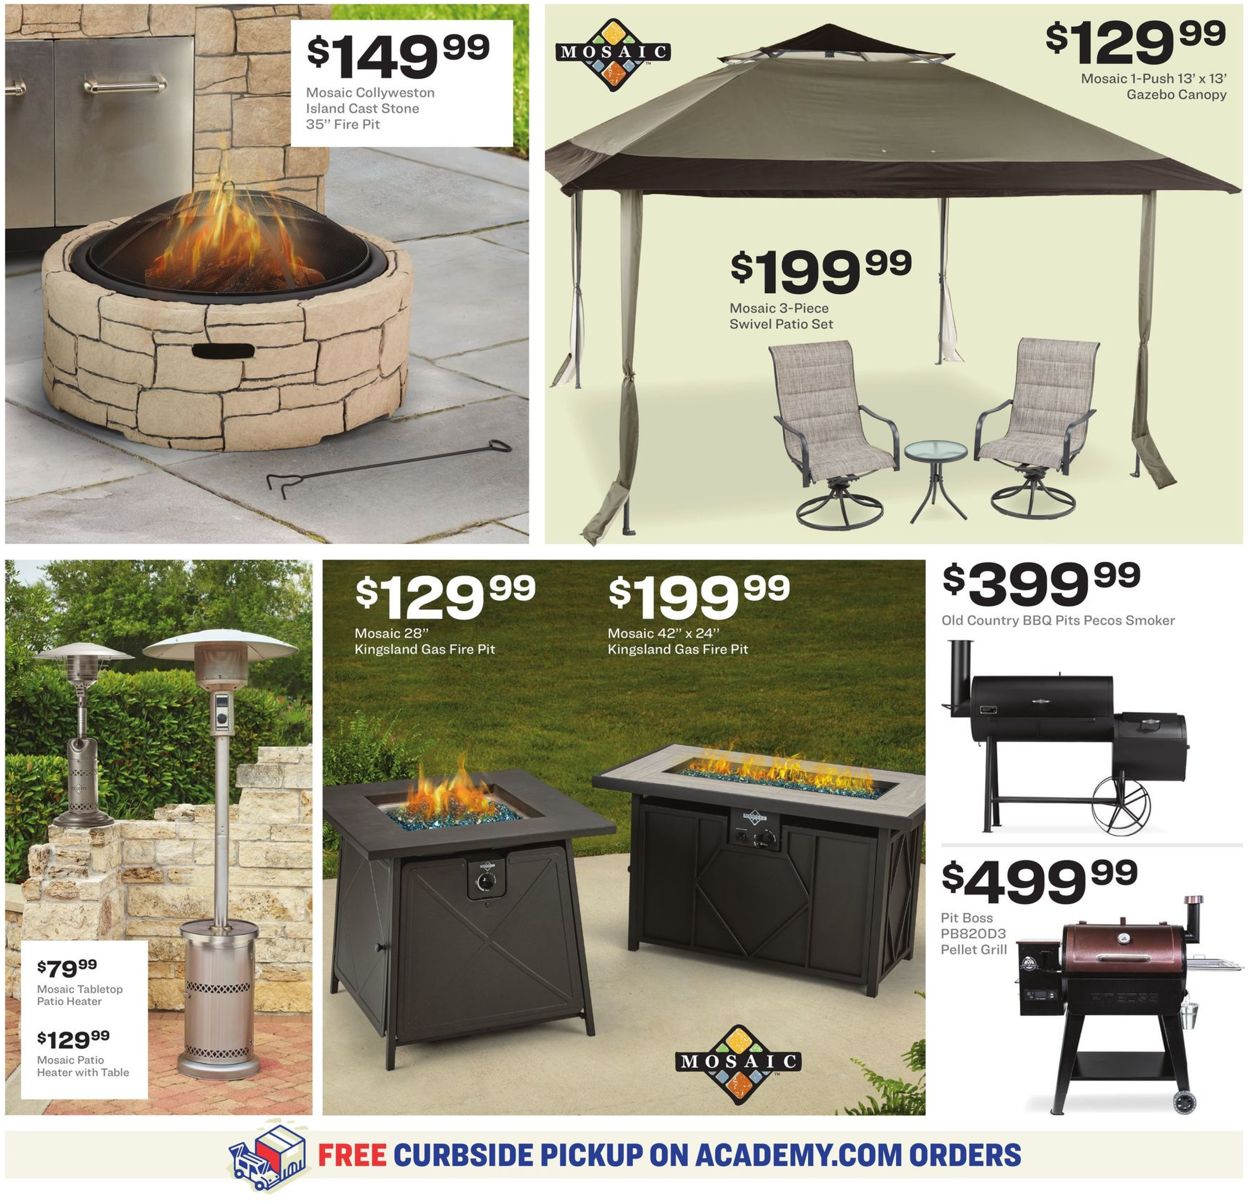 Academy Sports Cur Weekly Ad 10 12, Mosaic 28 In Kingsland Gas Fire Pit